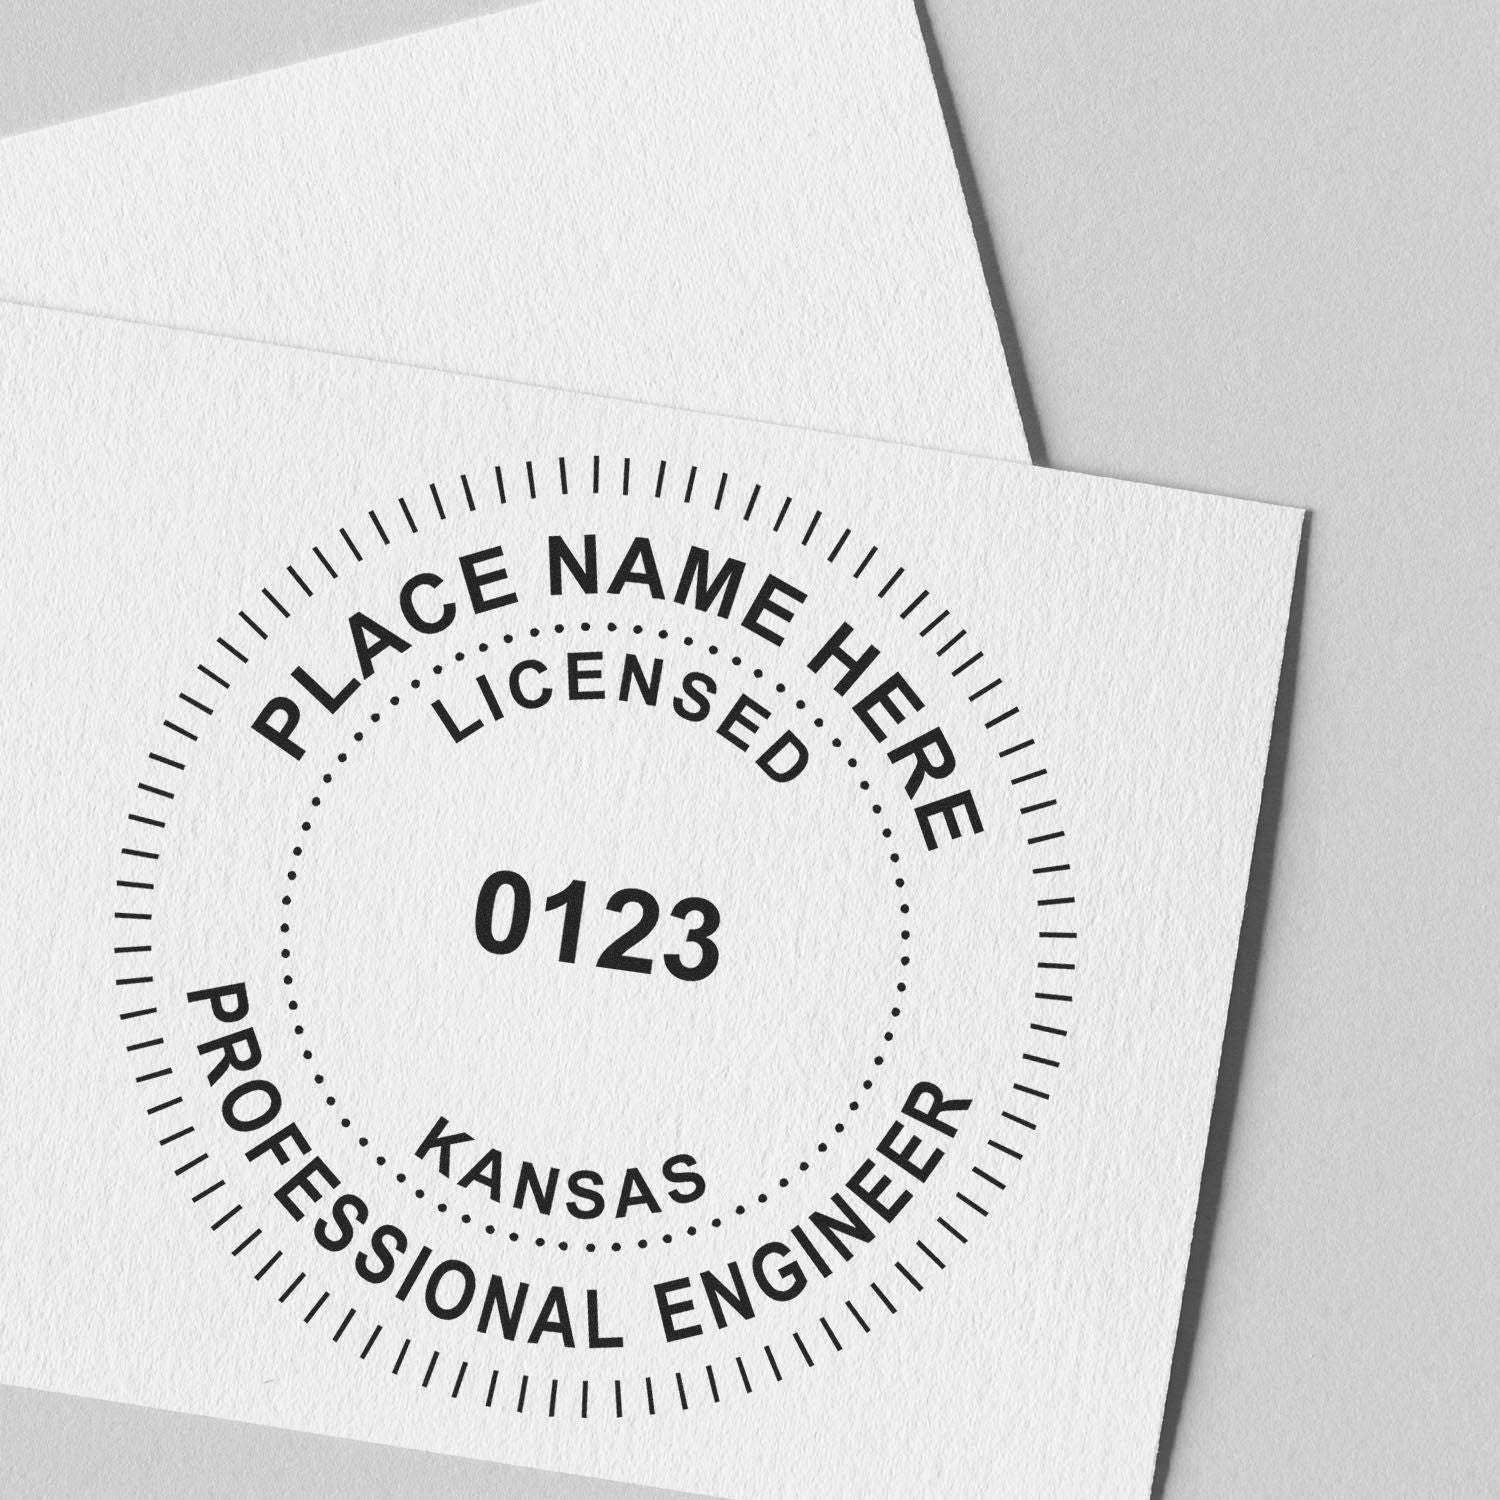 Mastering the Requirements: PE Stamp Regulations in Kansas Unveiled Feature Image